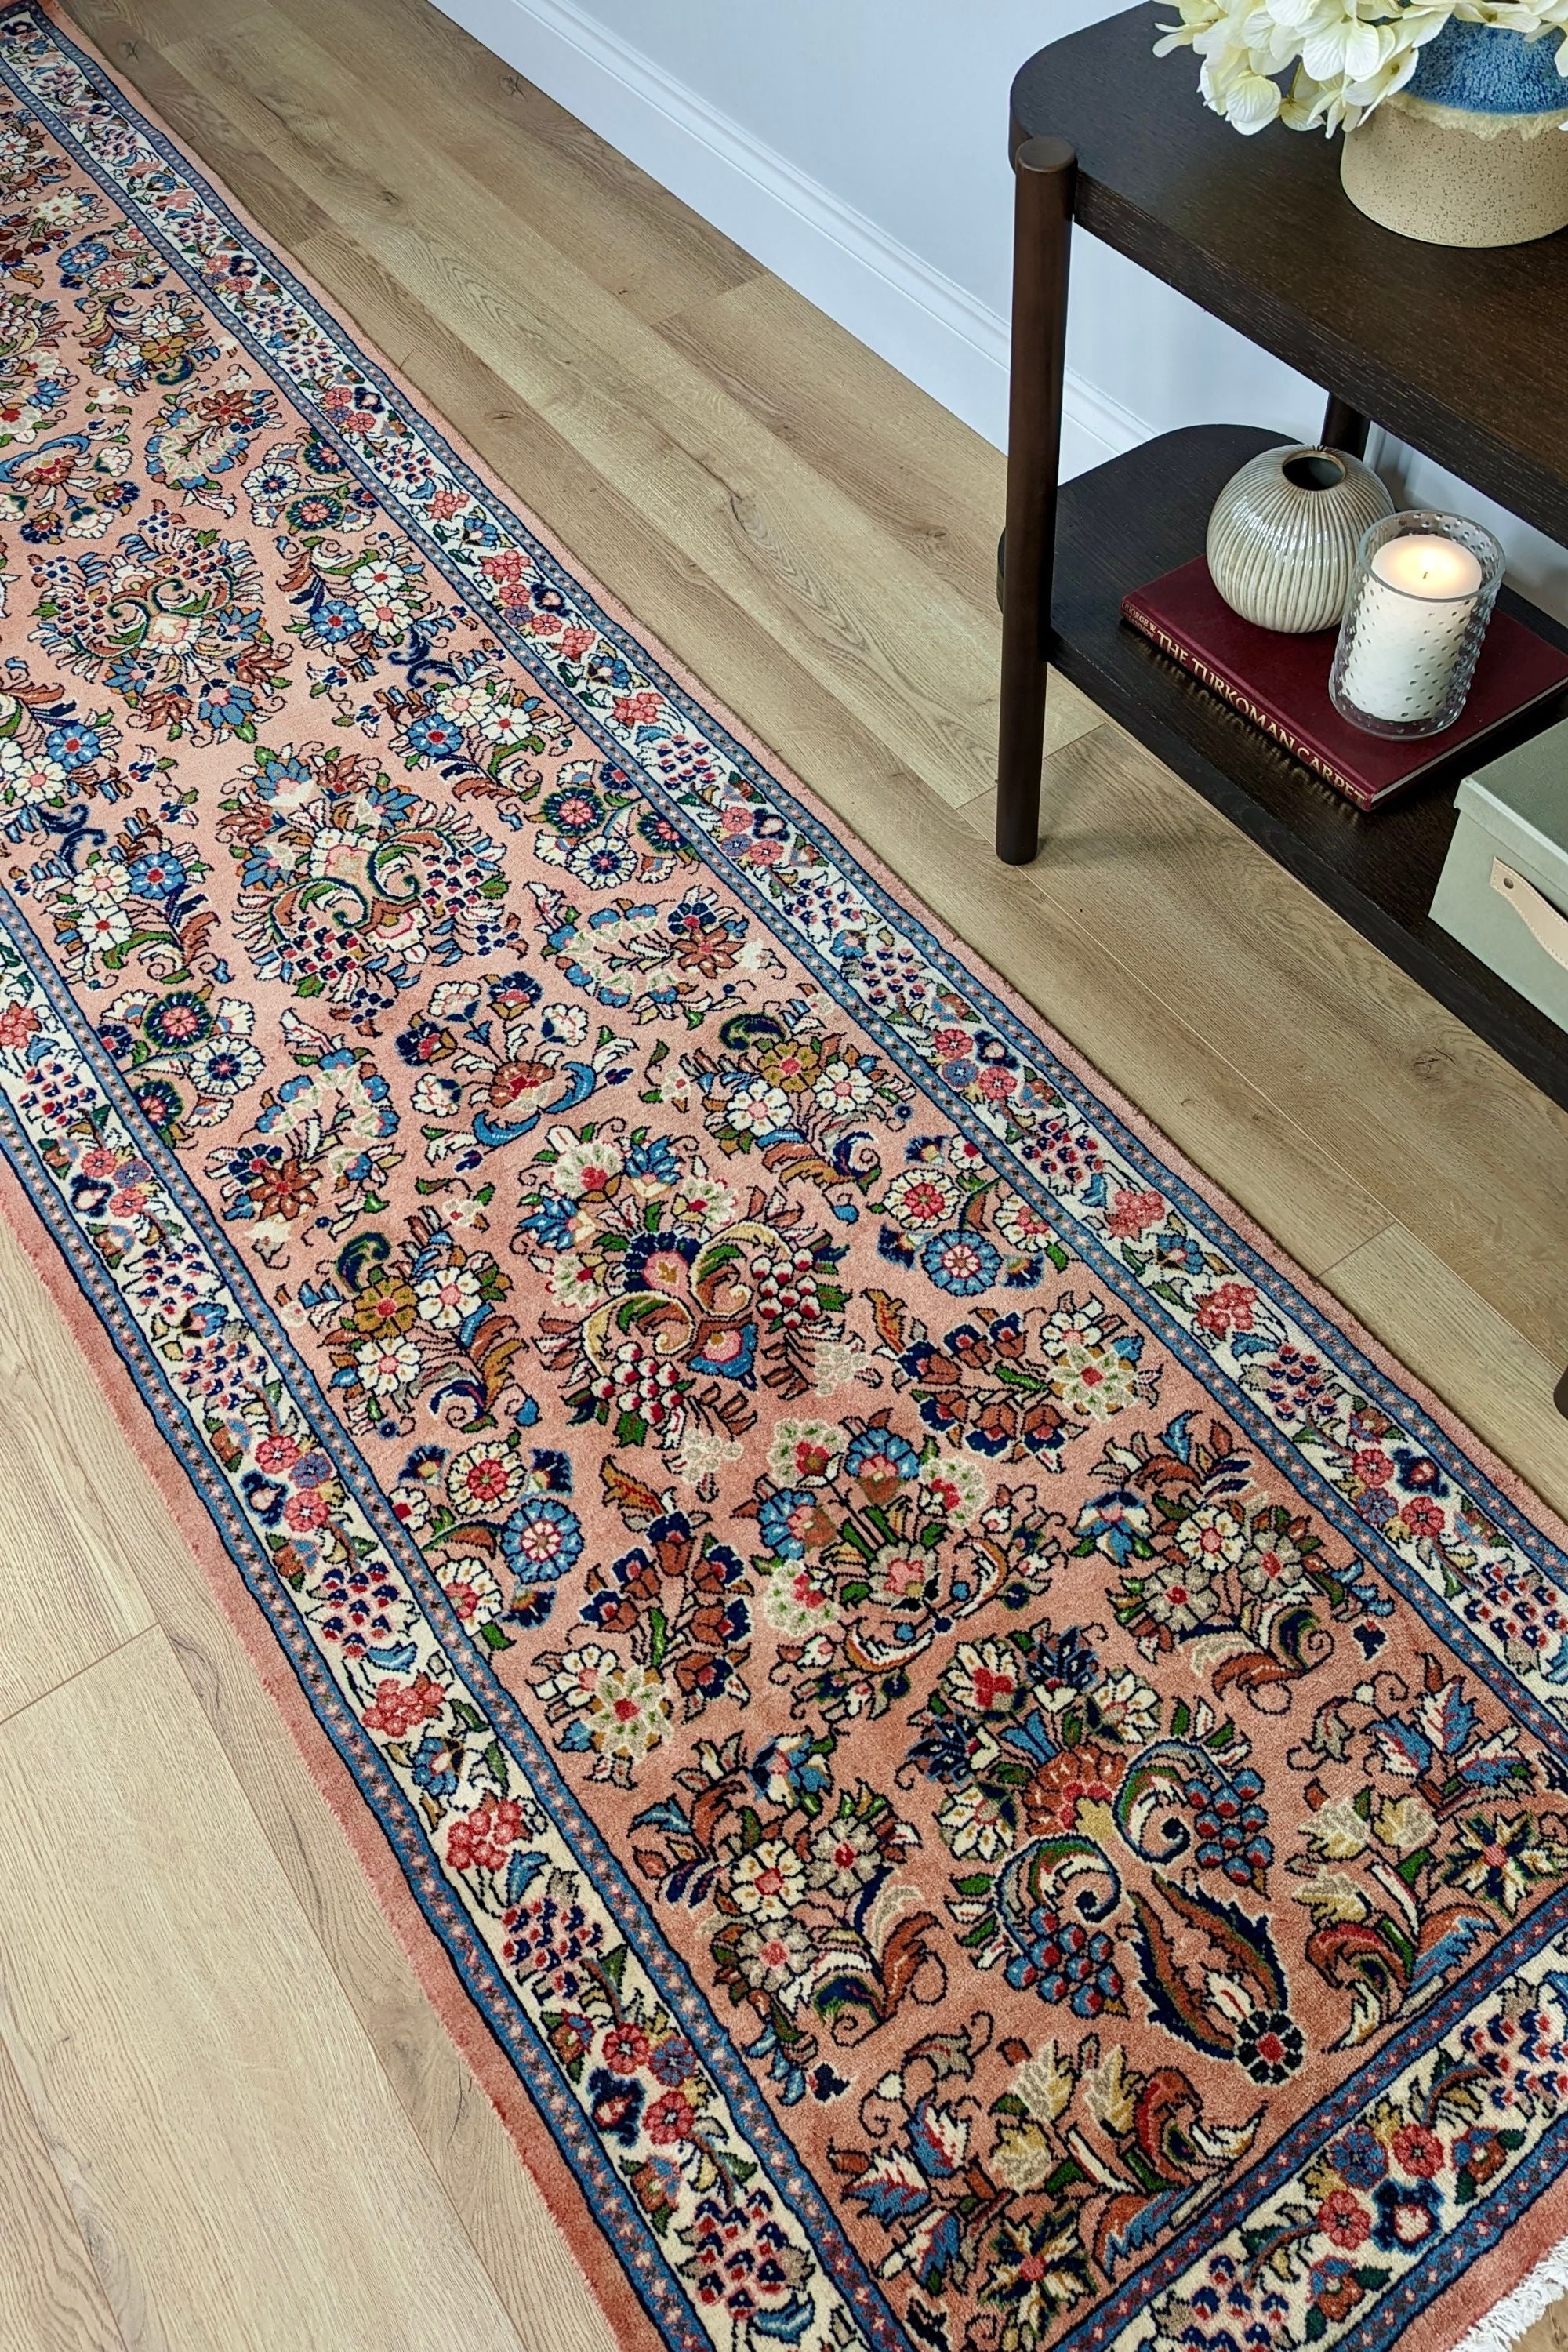 Authentic persian runner with traditional floral design in red